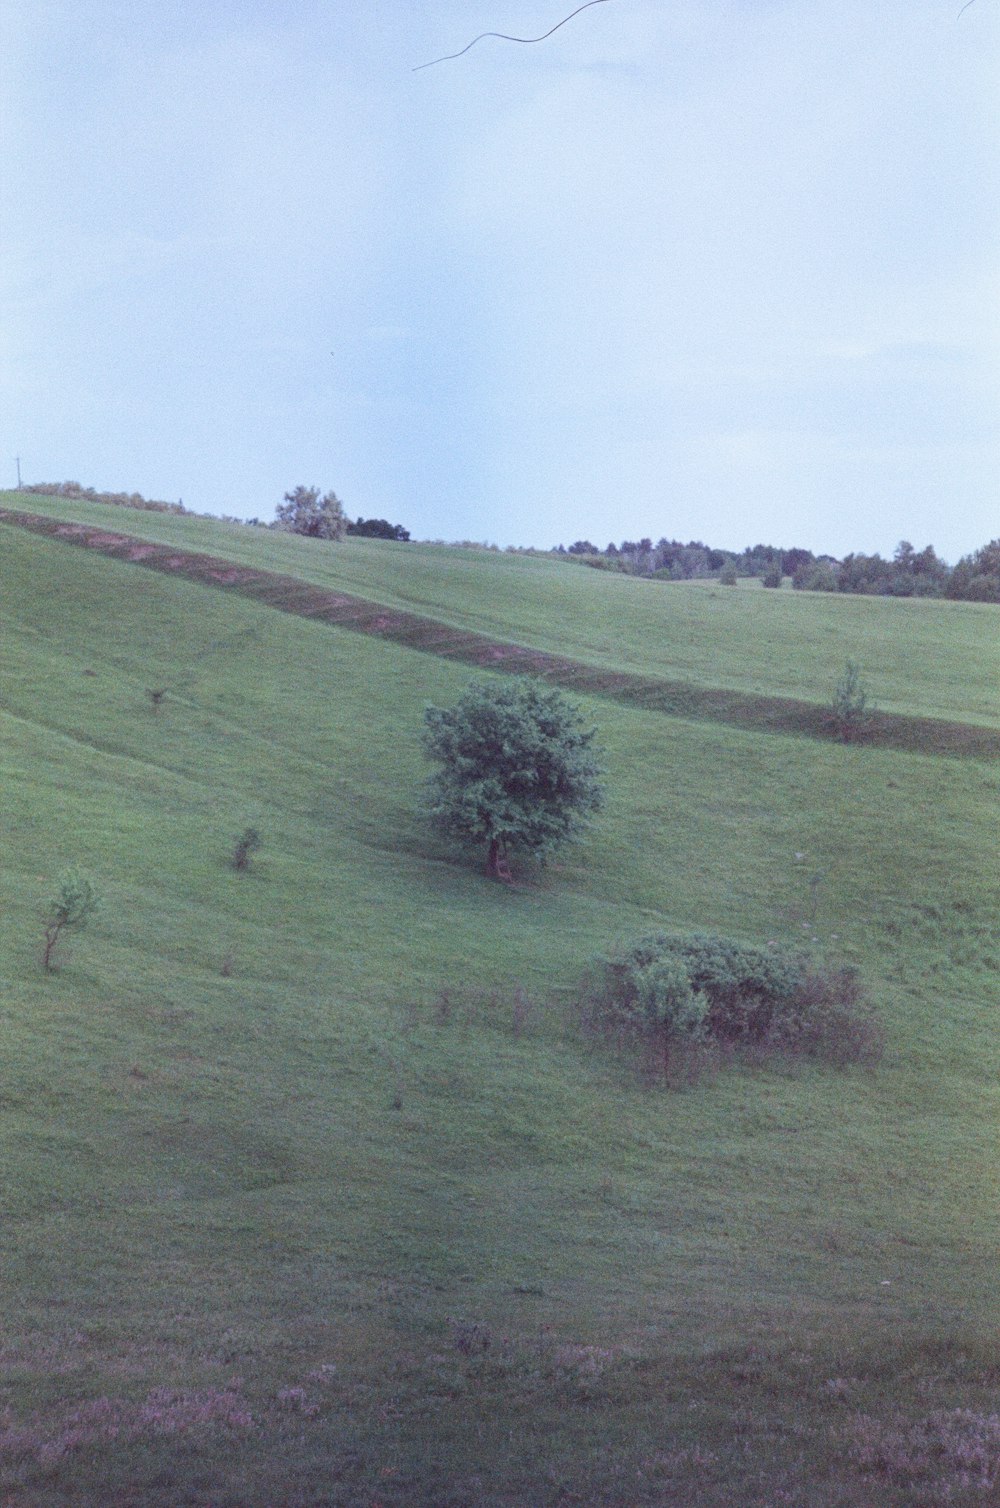 a lone tree on a grassy hill side